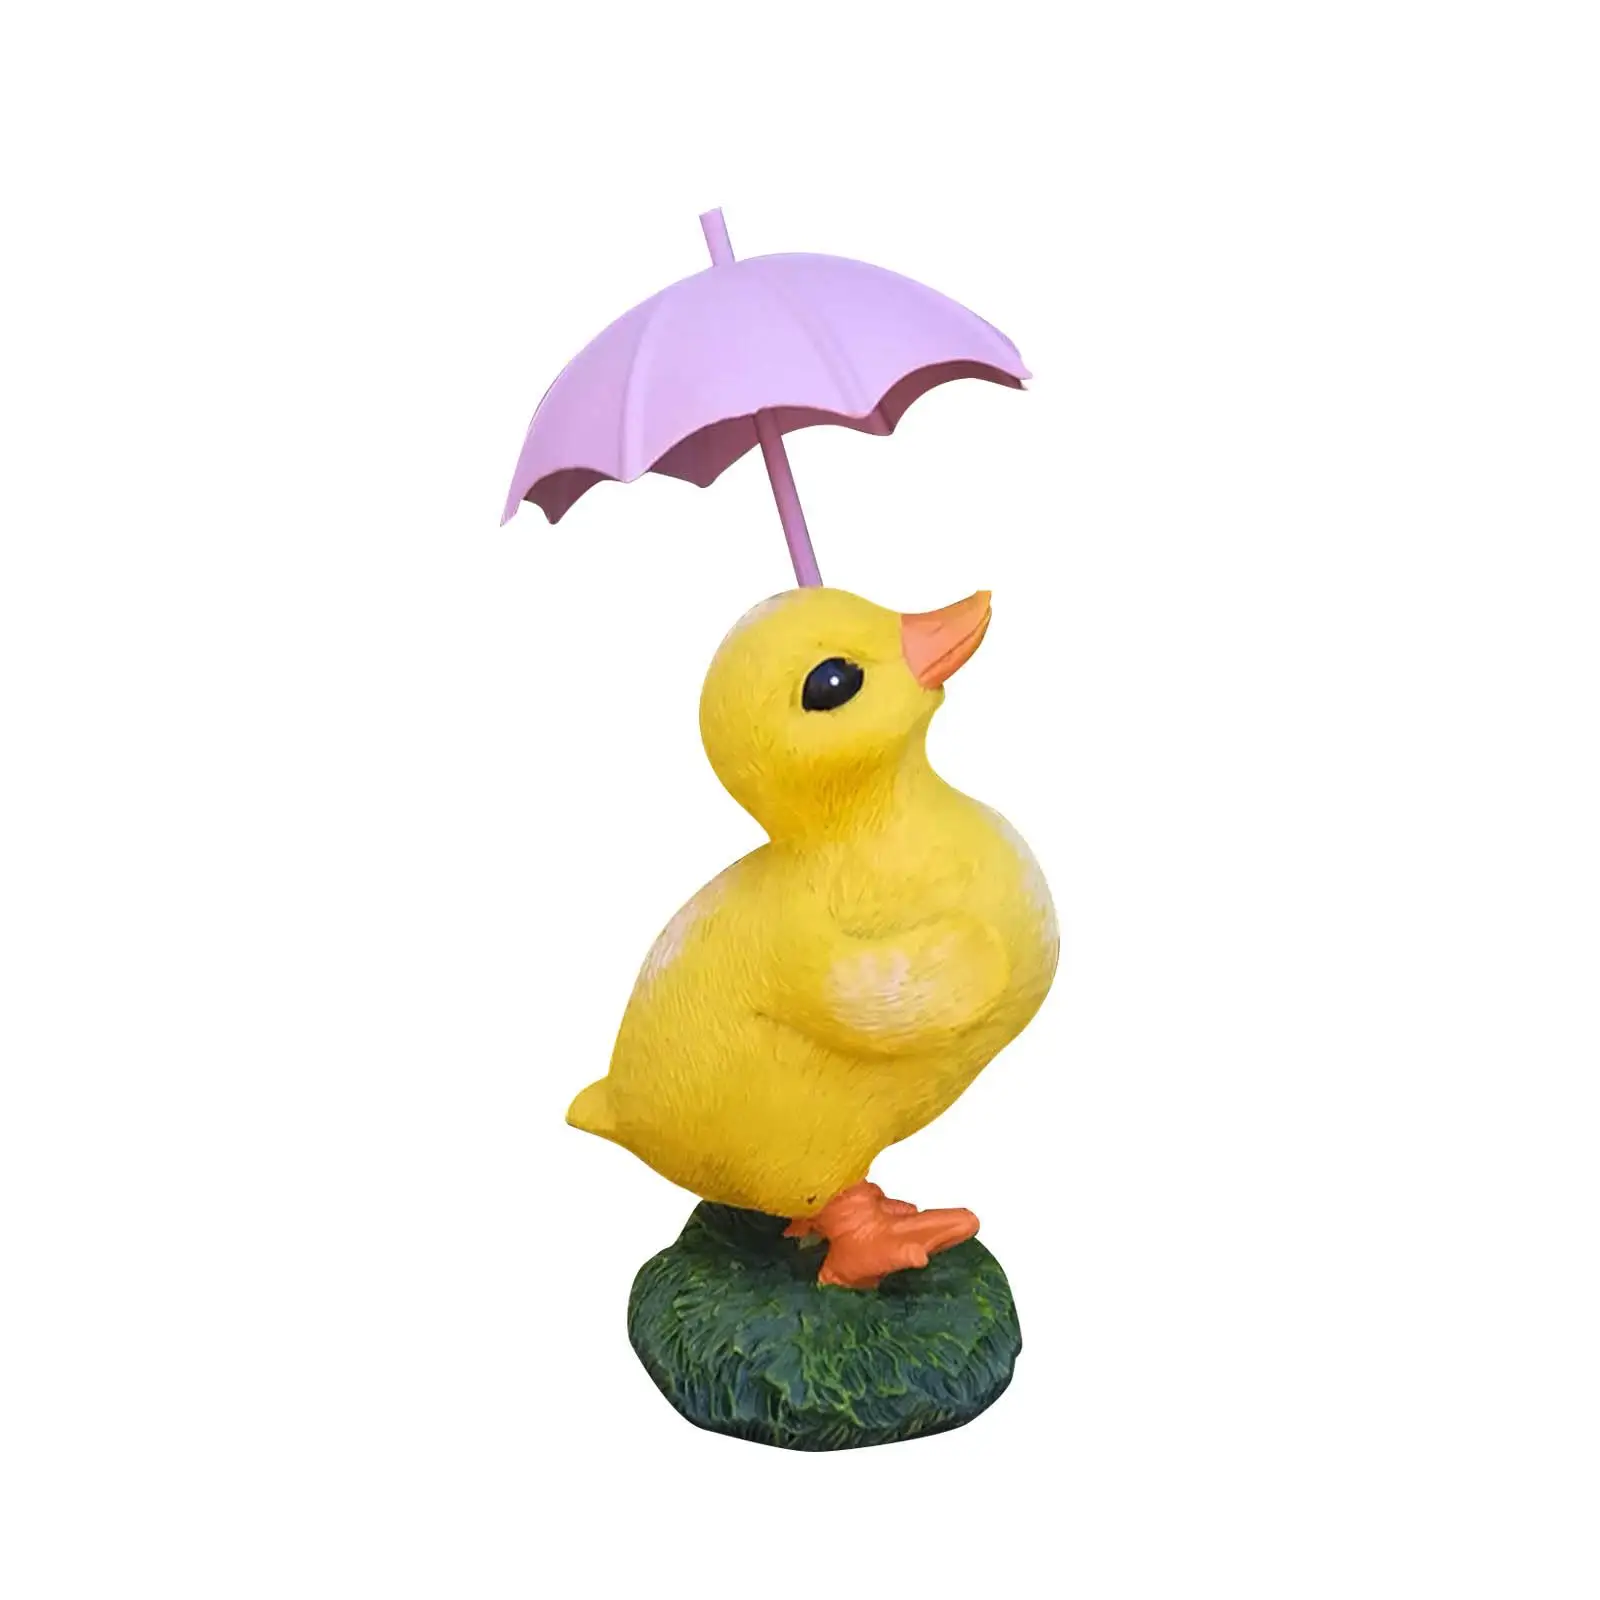 Realistic Duck Statues Collection Outdoor Decor Animals Crafts Lifelike Duck Sculptures for Porch Yard Lawn Courtyard Ornament